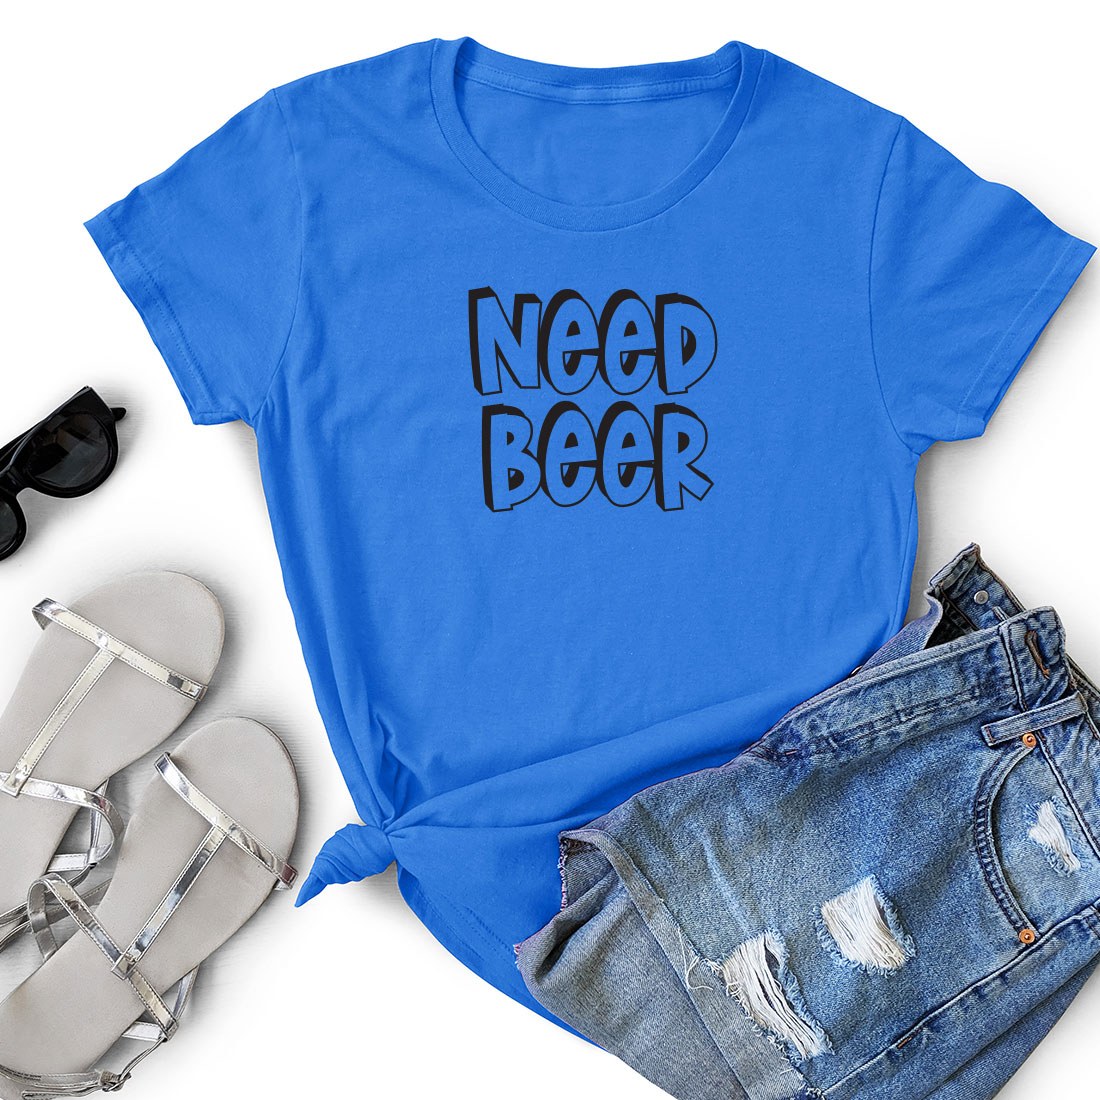 T - shirt that says need beer next to a pair of shorts.